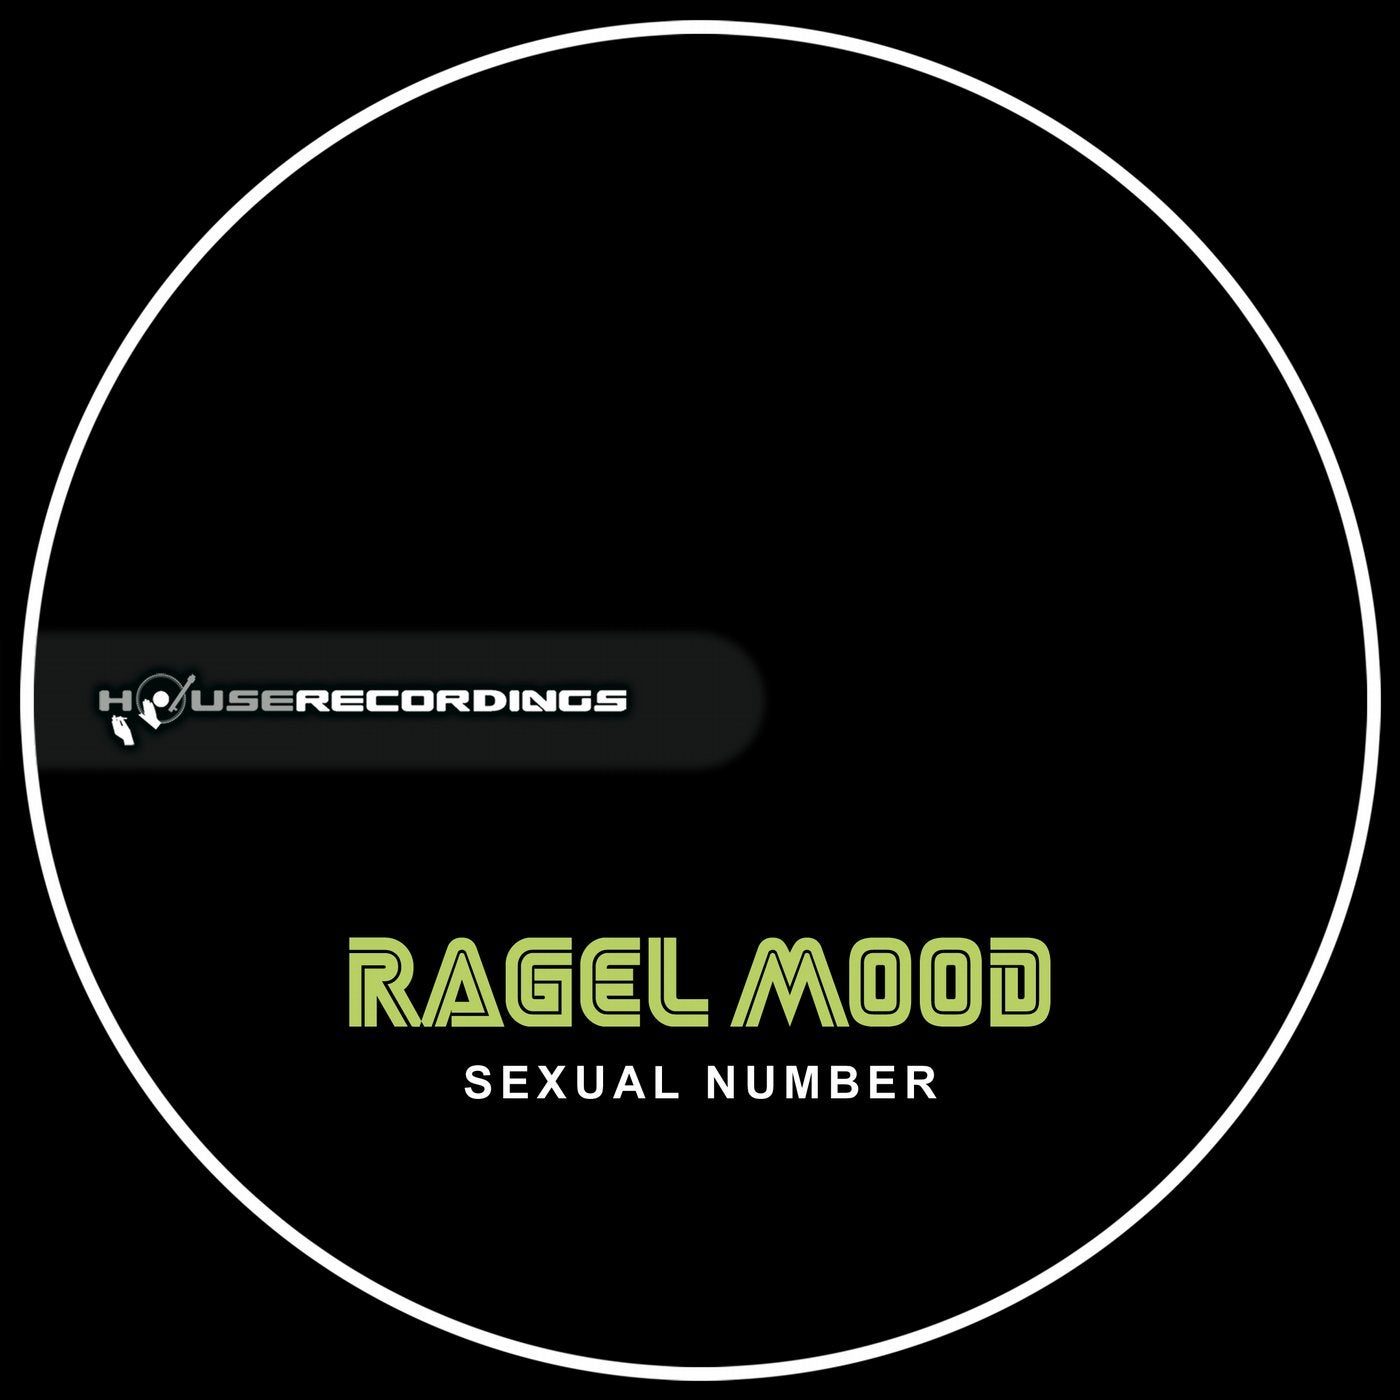 Sexual Number